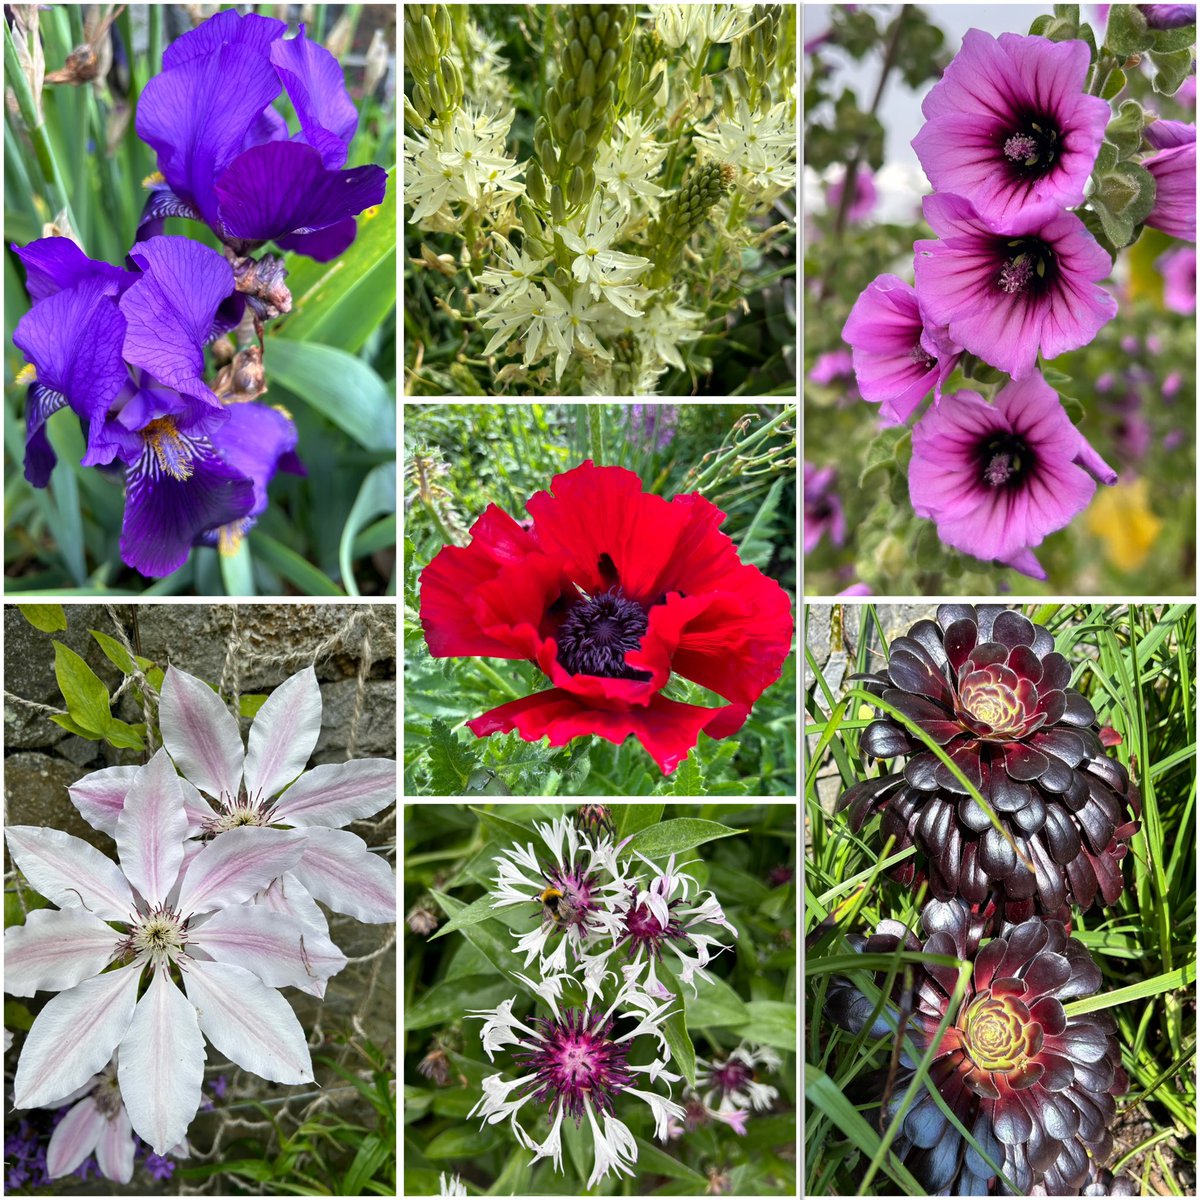 While I wait for the rain to stop, ever the optimist, some random pics from last week. Quite an eclectic mix for a rare #SevenOnSunday from me, enjoy the day the best you can everyone